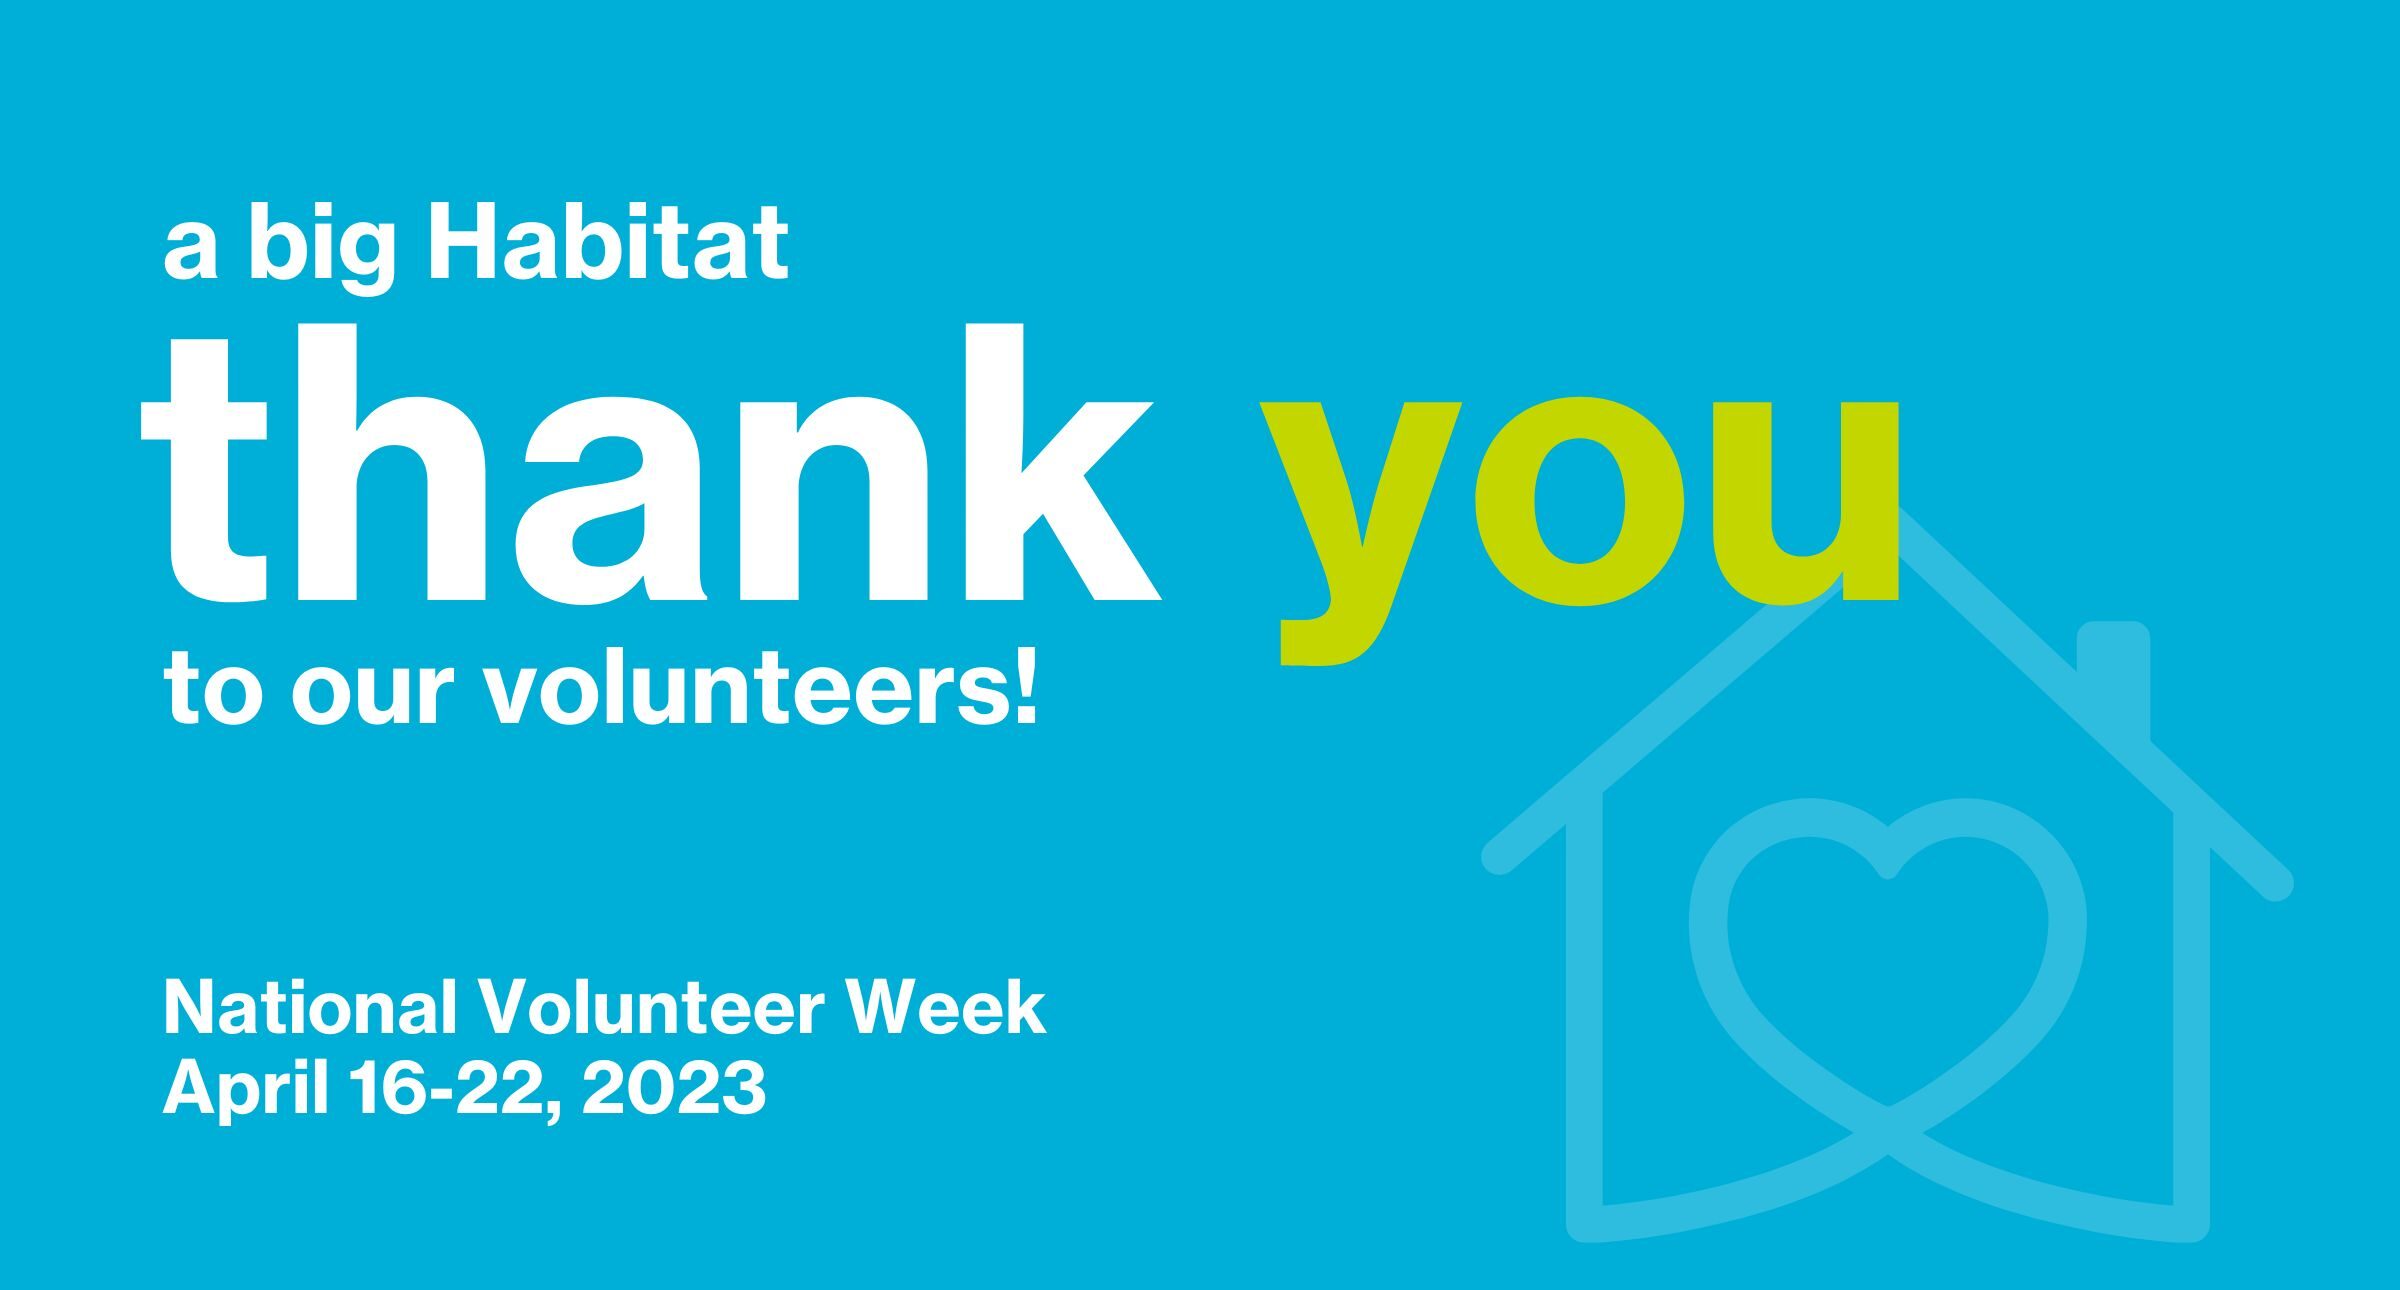 habitat blue background, with an image of a house outline with a heart shape inside, text contains the following "a big Habitat thank you to our volunteers, National Volunteer Week April 16-22, 2023"